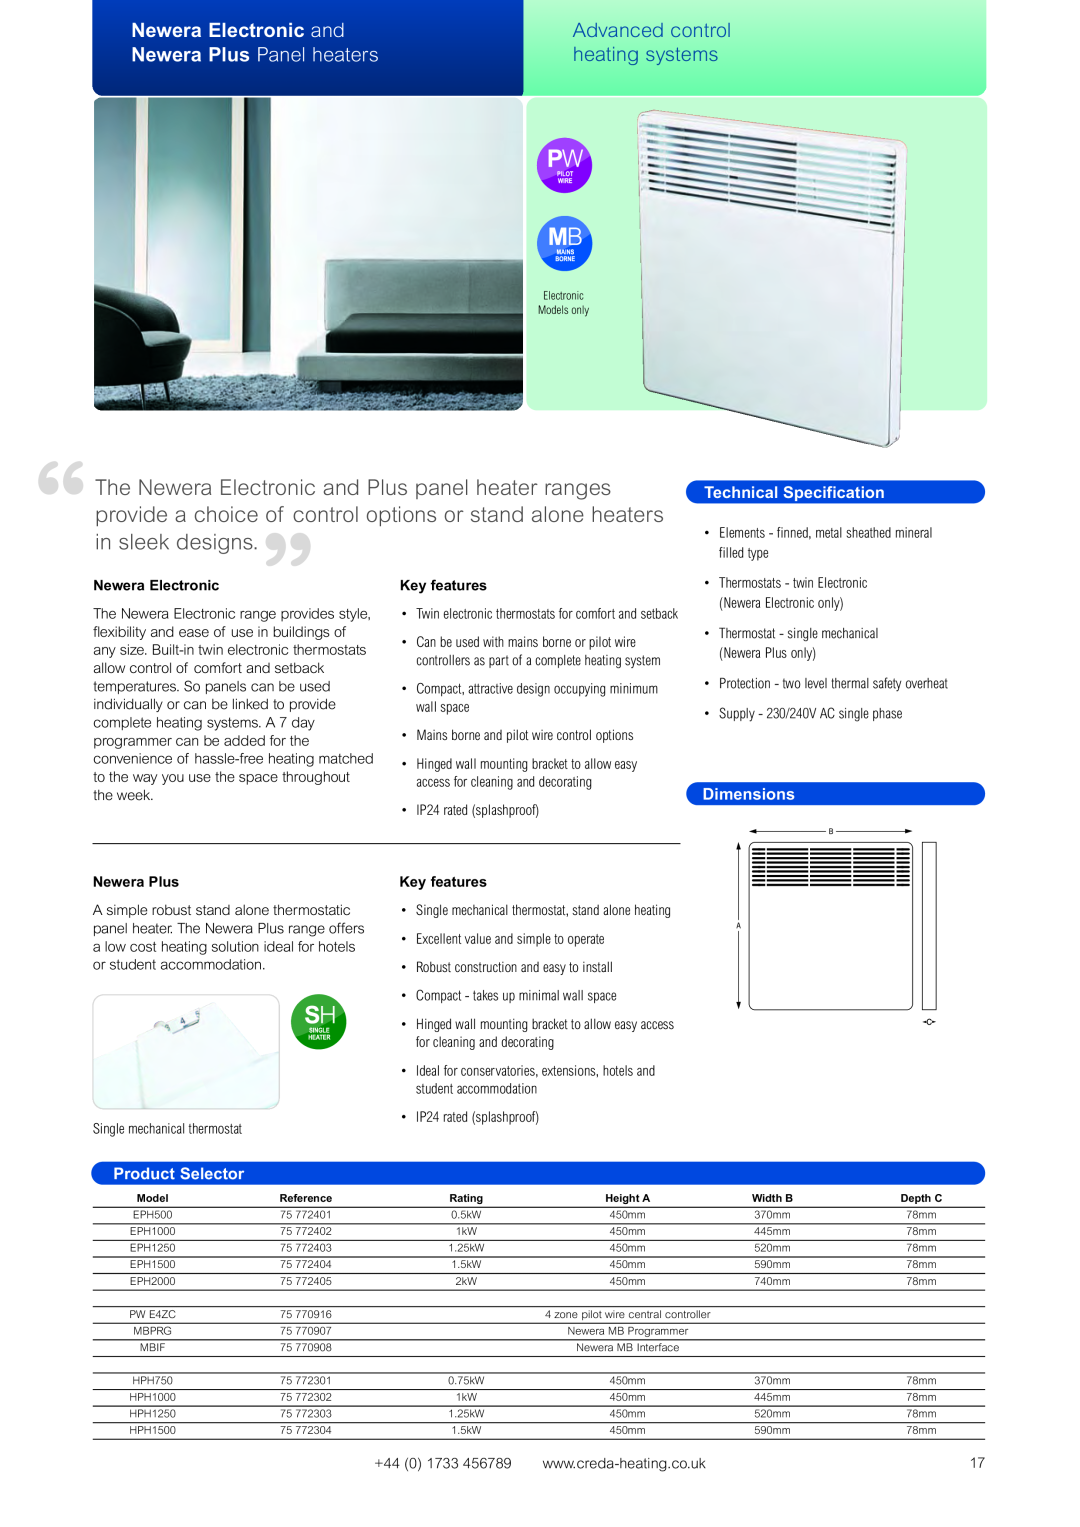 Creda Heating Solution “in sleek designs, Newera Electronic and, Advanced control, Newera Plus Panel heaters, Dimensions 